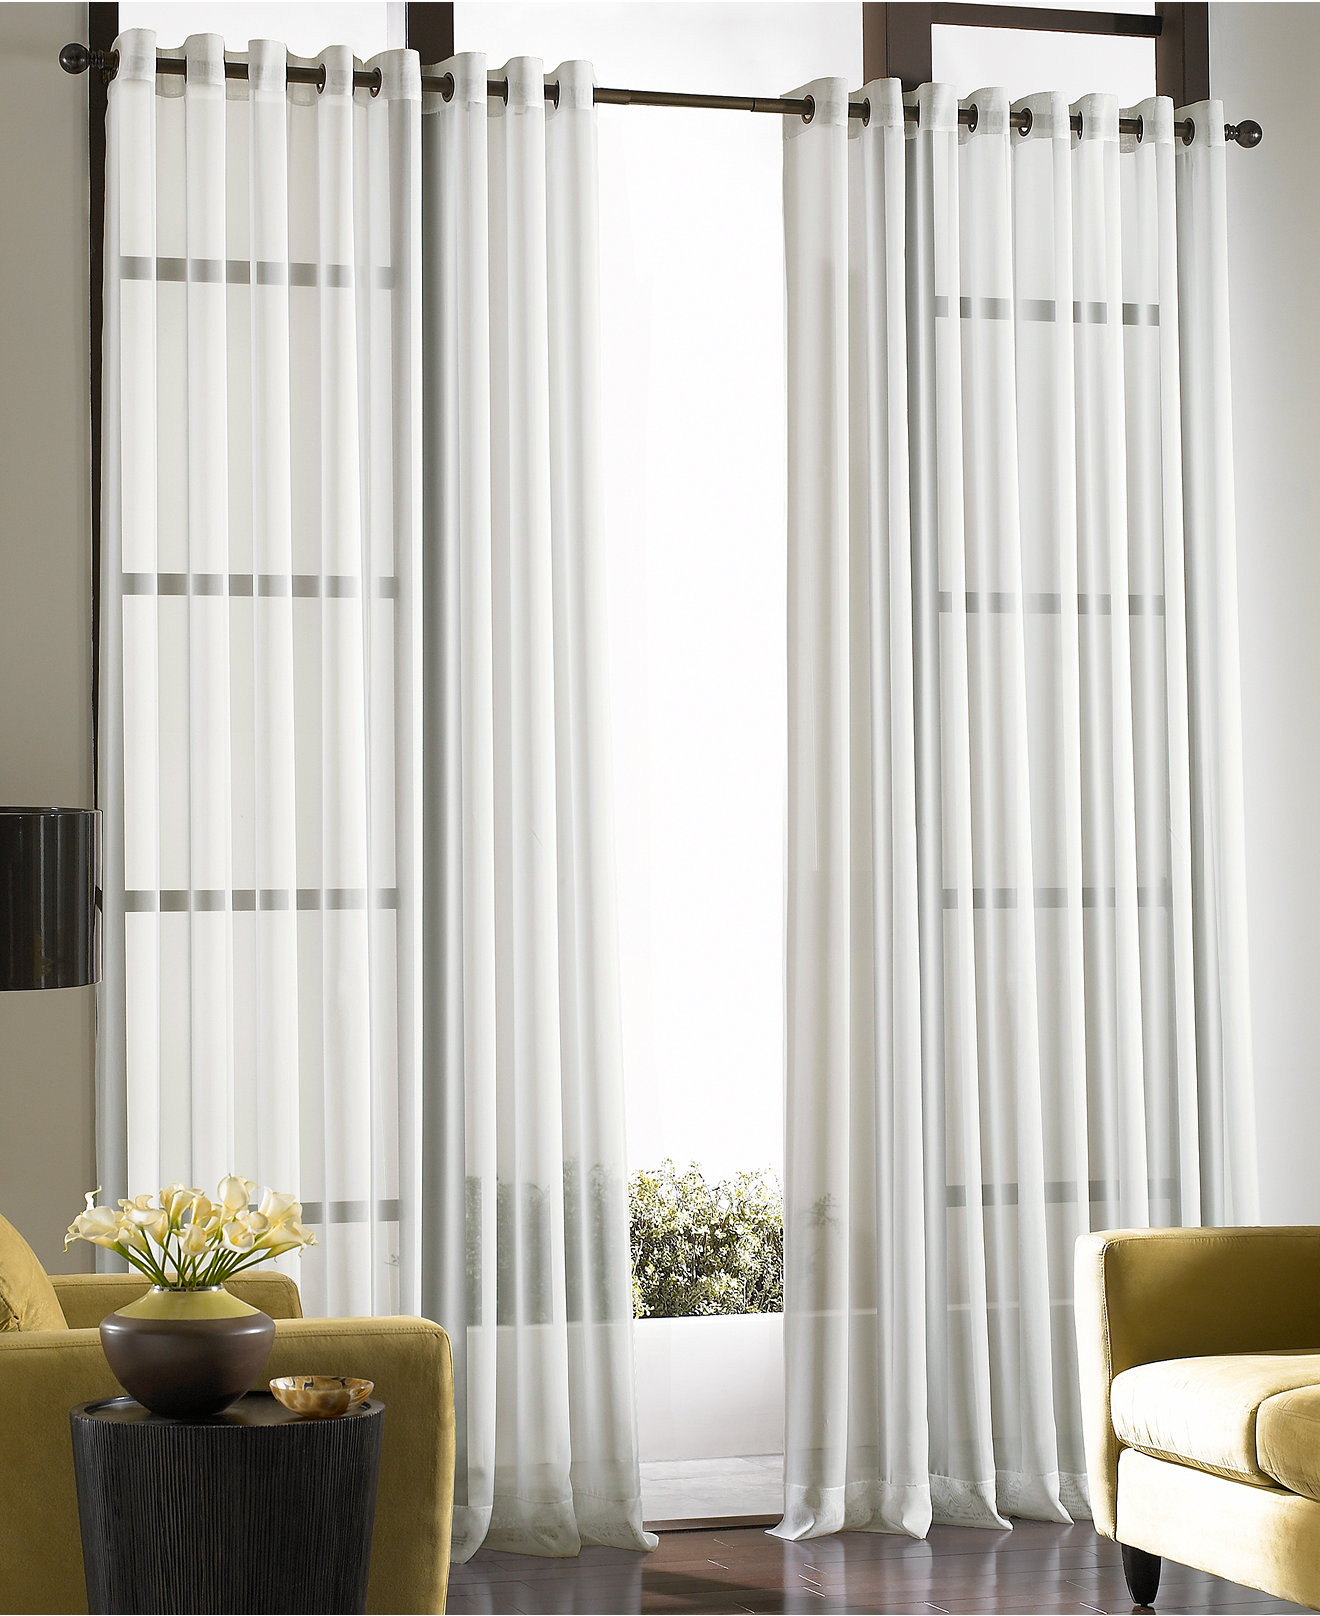 Sears Curtains For Living Room
 Blinds & Curtains Beautiful Macys Curtains For Enchanting